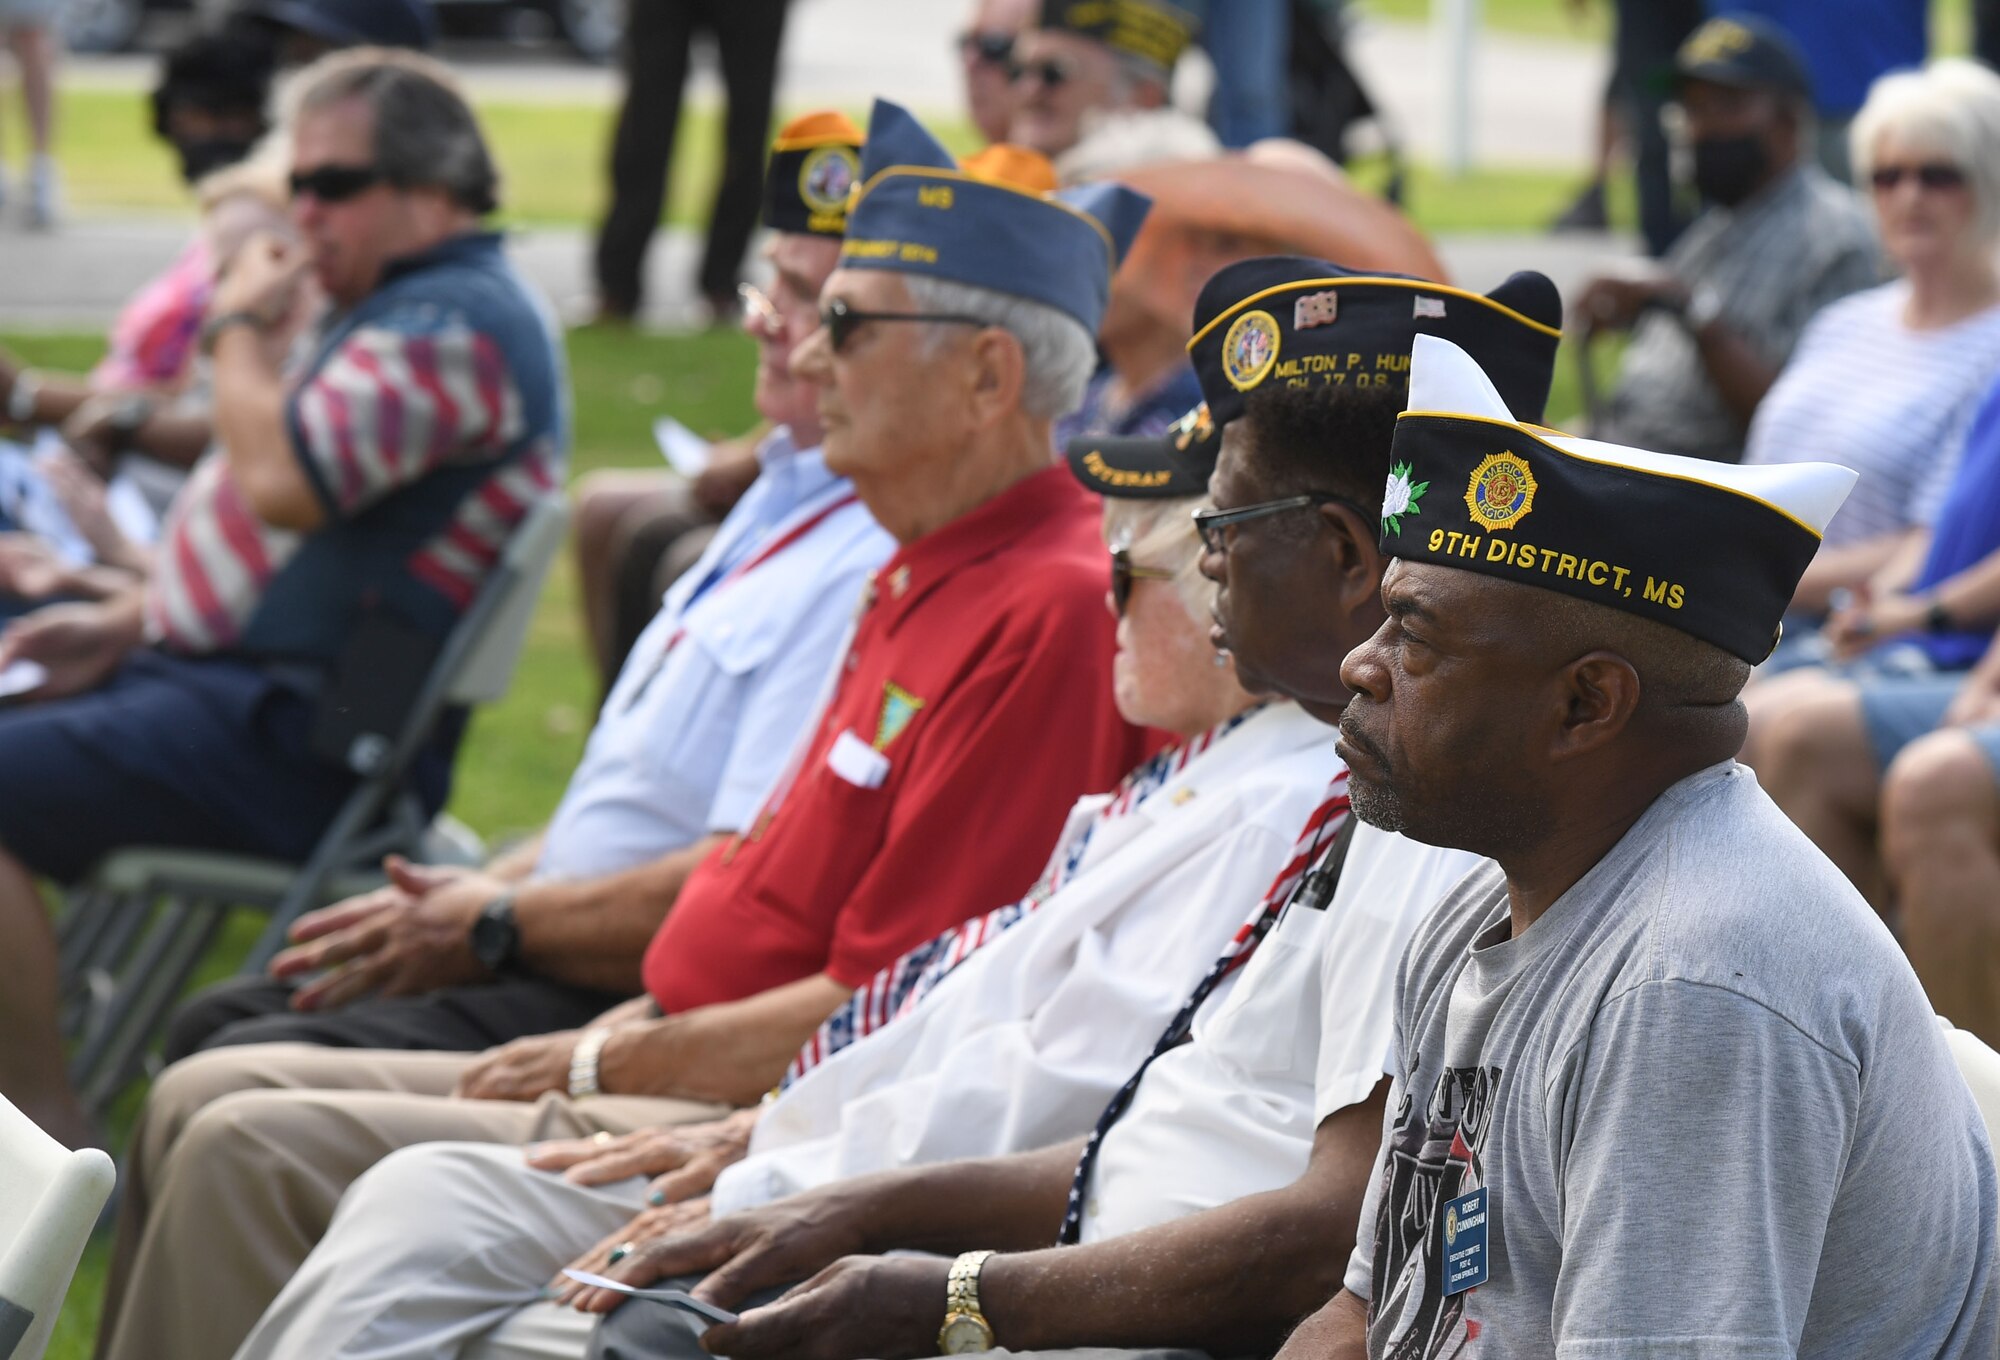 Local veterans and community members attend the Biloxi National Cemetery Memorial Day Ceremony in Biloxi, Mississippi, May 30, 2022. The ceremony honored those who have made the ultimate sacrifice while serving in the armed forces. Biloxi National Cemetery is the final resting place of more than 23,000 veterans and their family members. Every year, 800 burials take place there for men and women who served in wars years ago and for those defending America today. (U.S. Air Force photo by Kemberly Groue)